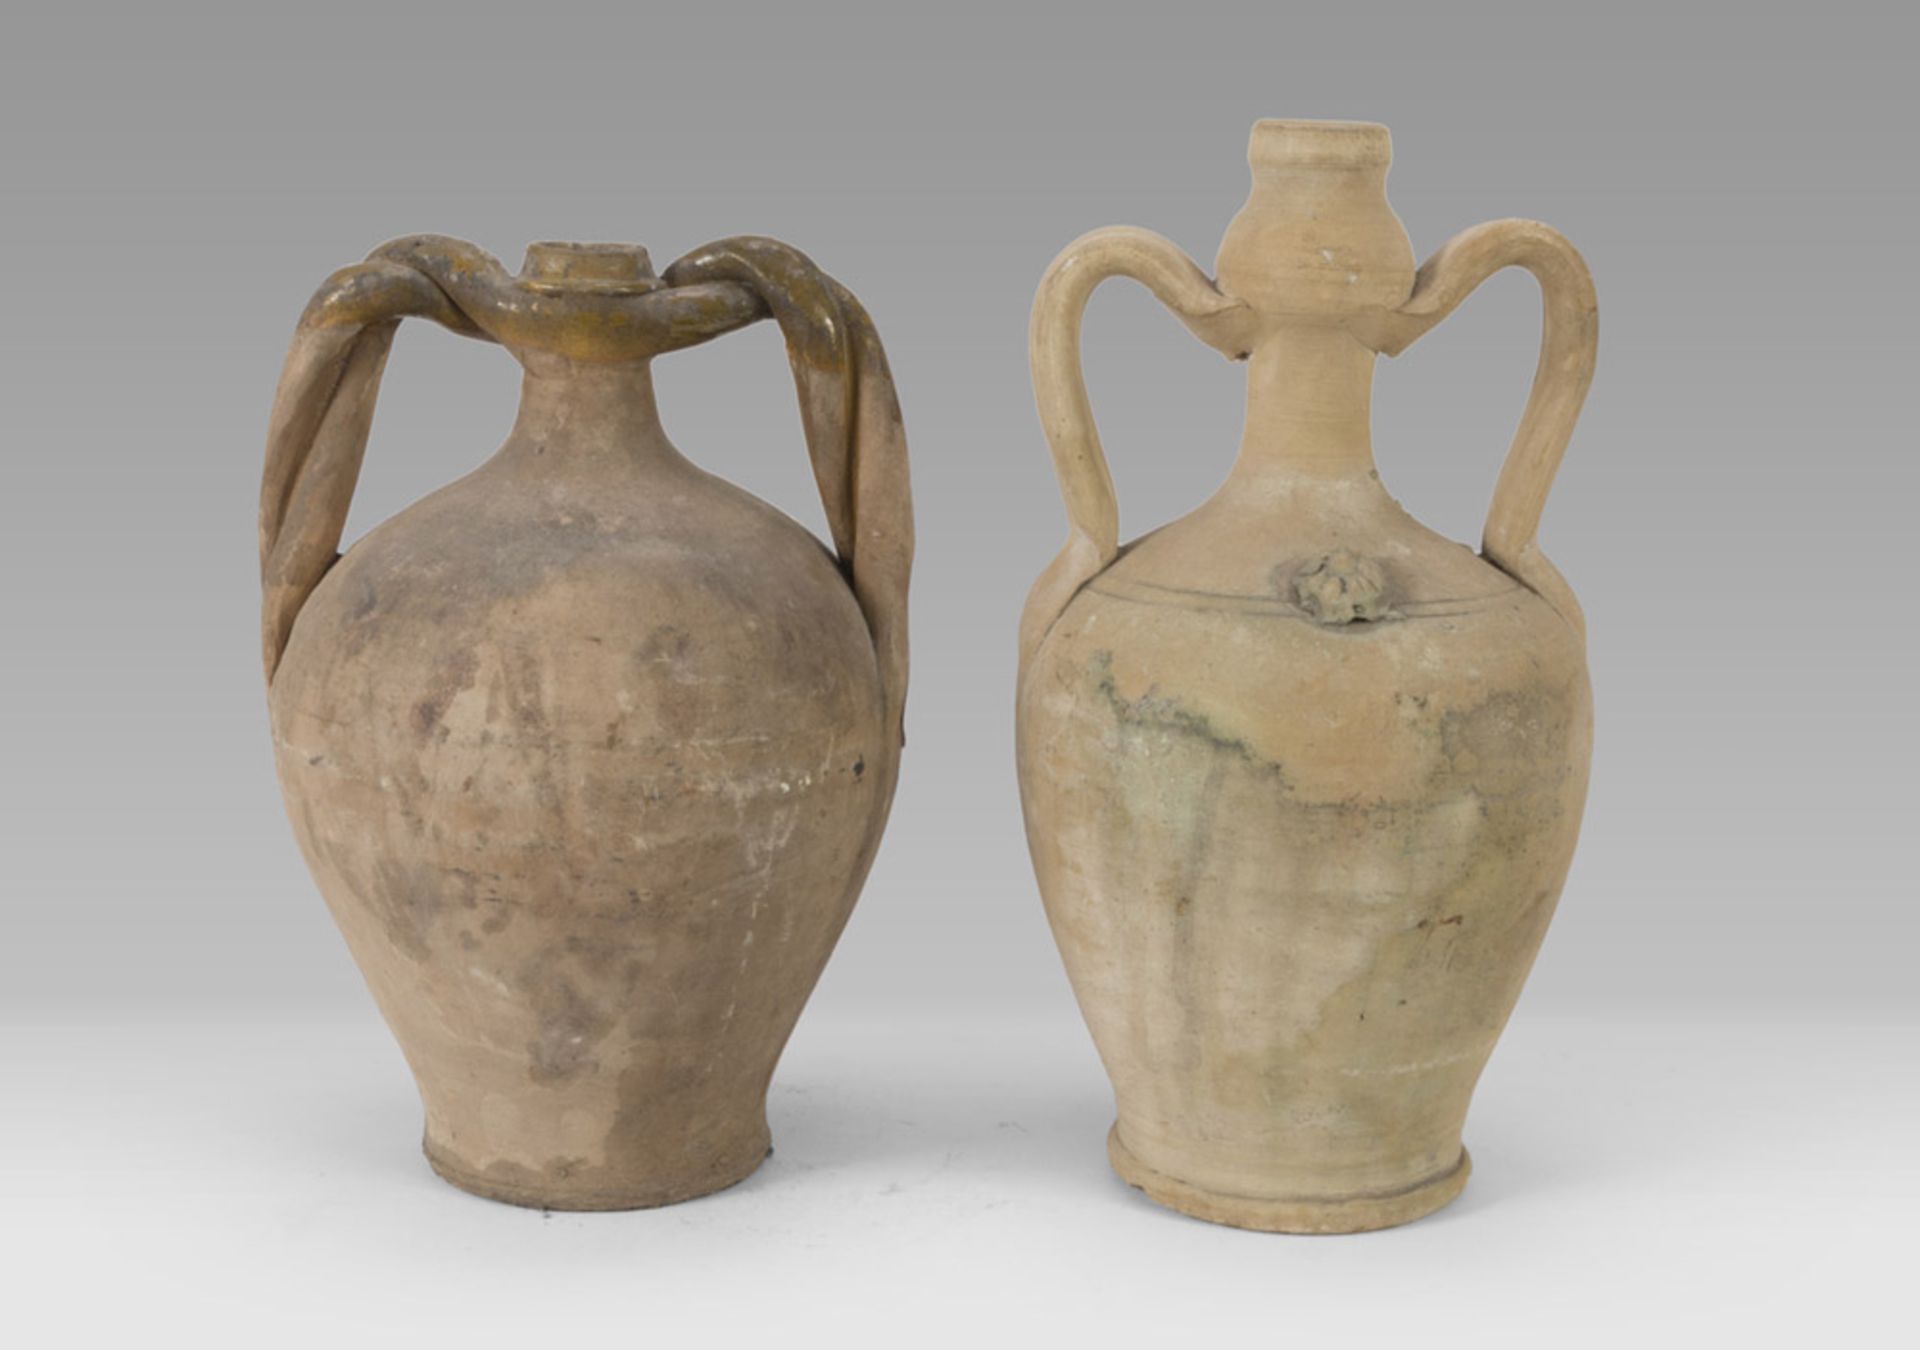 A PAIR OF EARTHENWARE FLASKS, SOUTHERN ITALY, EARLY 20TH CENTURY